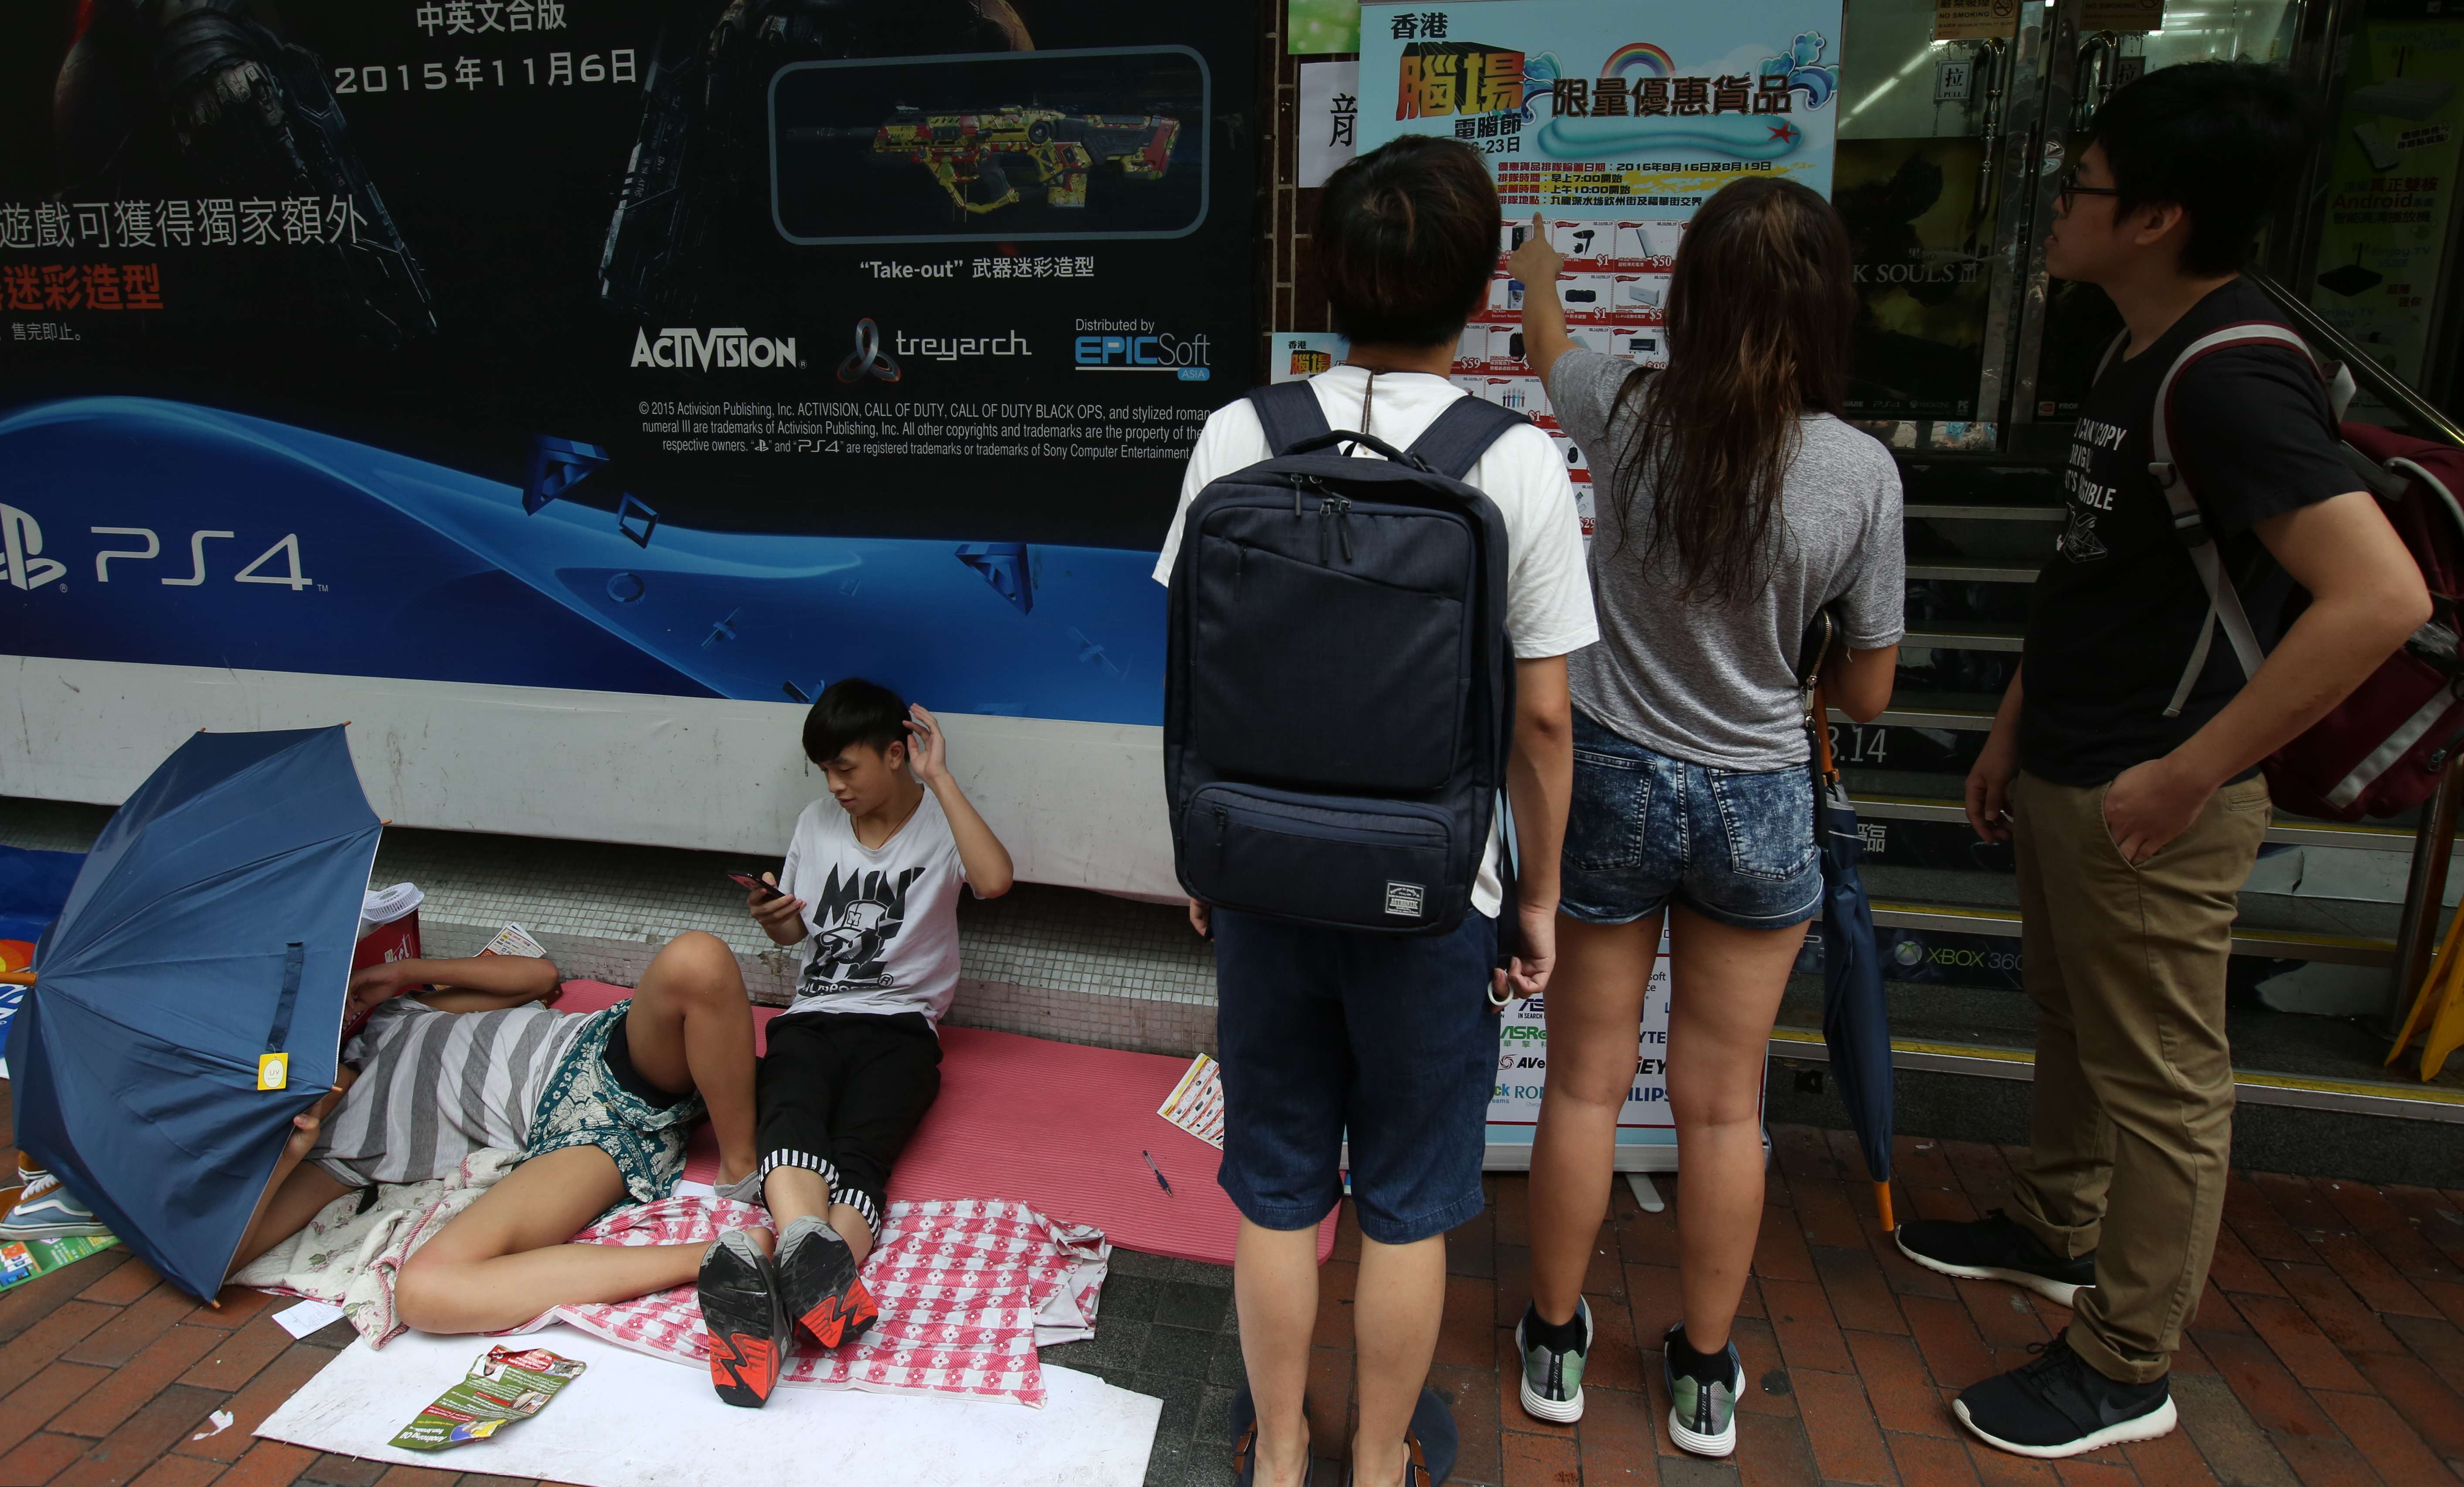 15-year-old Lee Ming (sitting) and his schoolmate have been queuing outside Golden Computer Arcade in Sham Shui Po since Sunday. Photo: Nora Tam